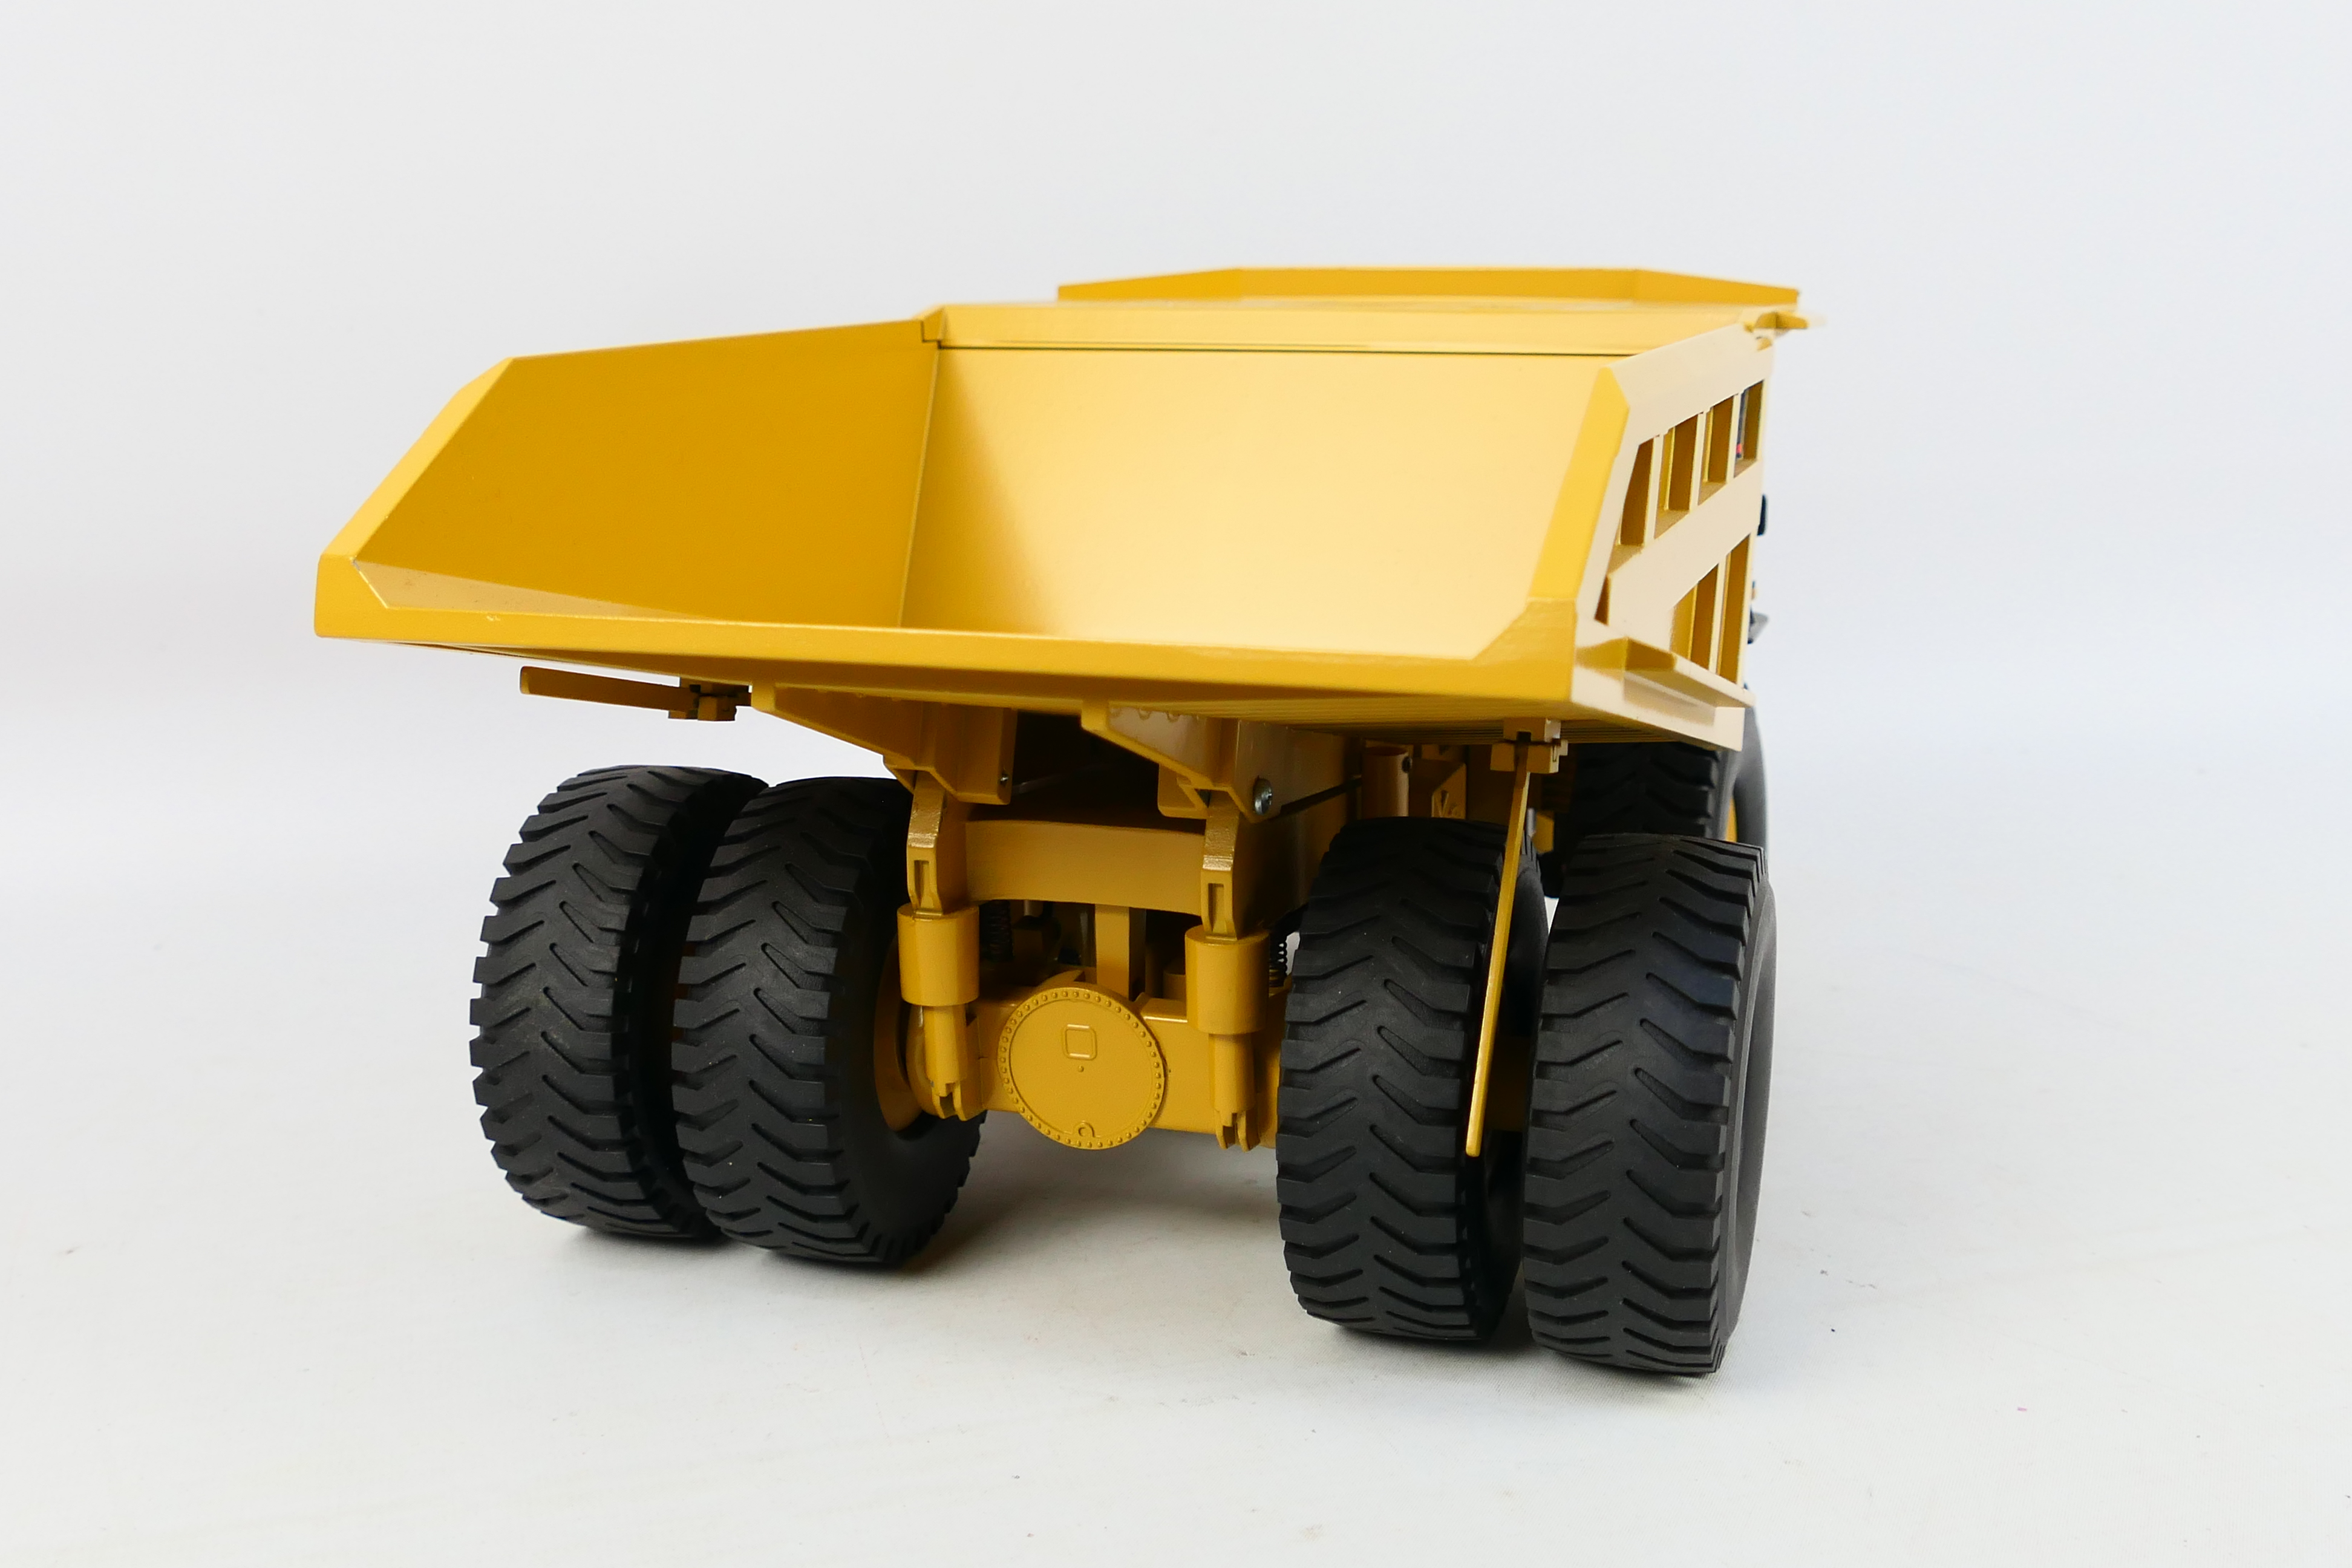 NZG - A 1:50 scale CAT 797 off highway dump truck from 2001 # 466. - Image 5 of 5